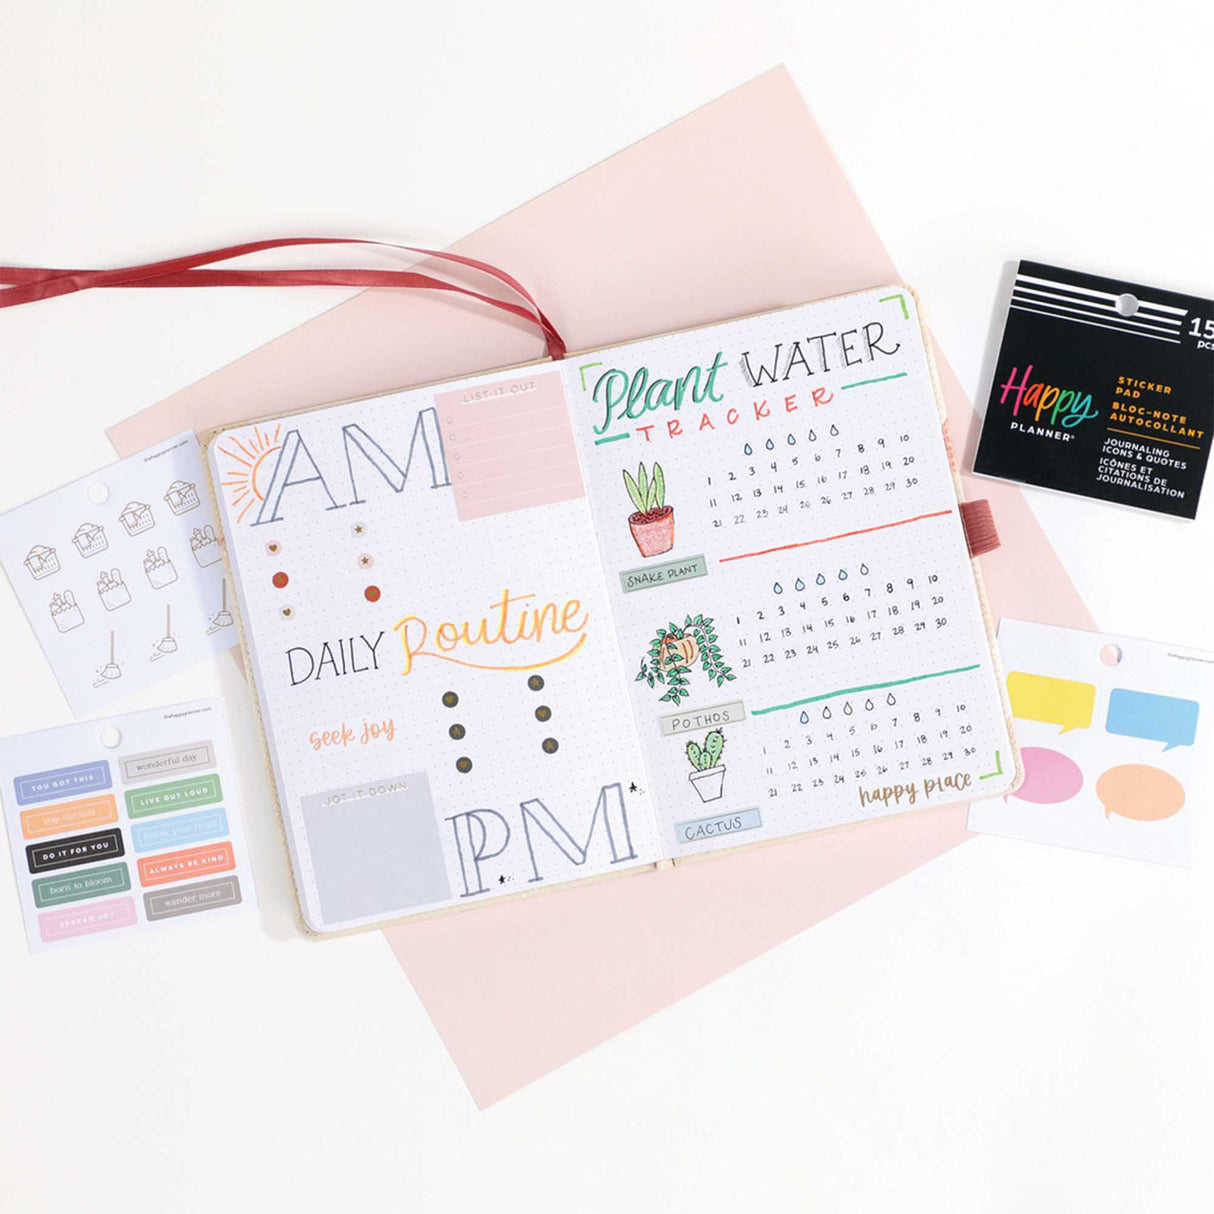 Happy Planner Journaling Icons & Quotes Tiny Sticker Pad